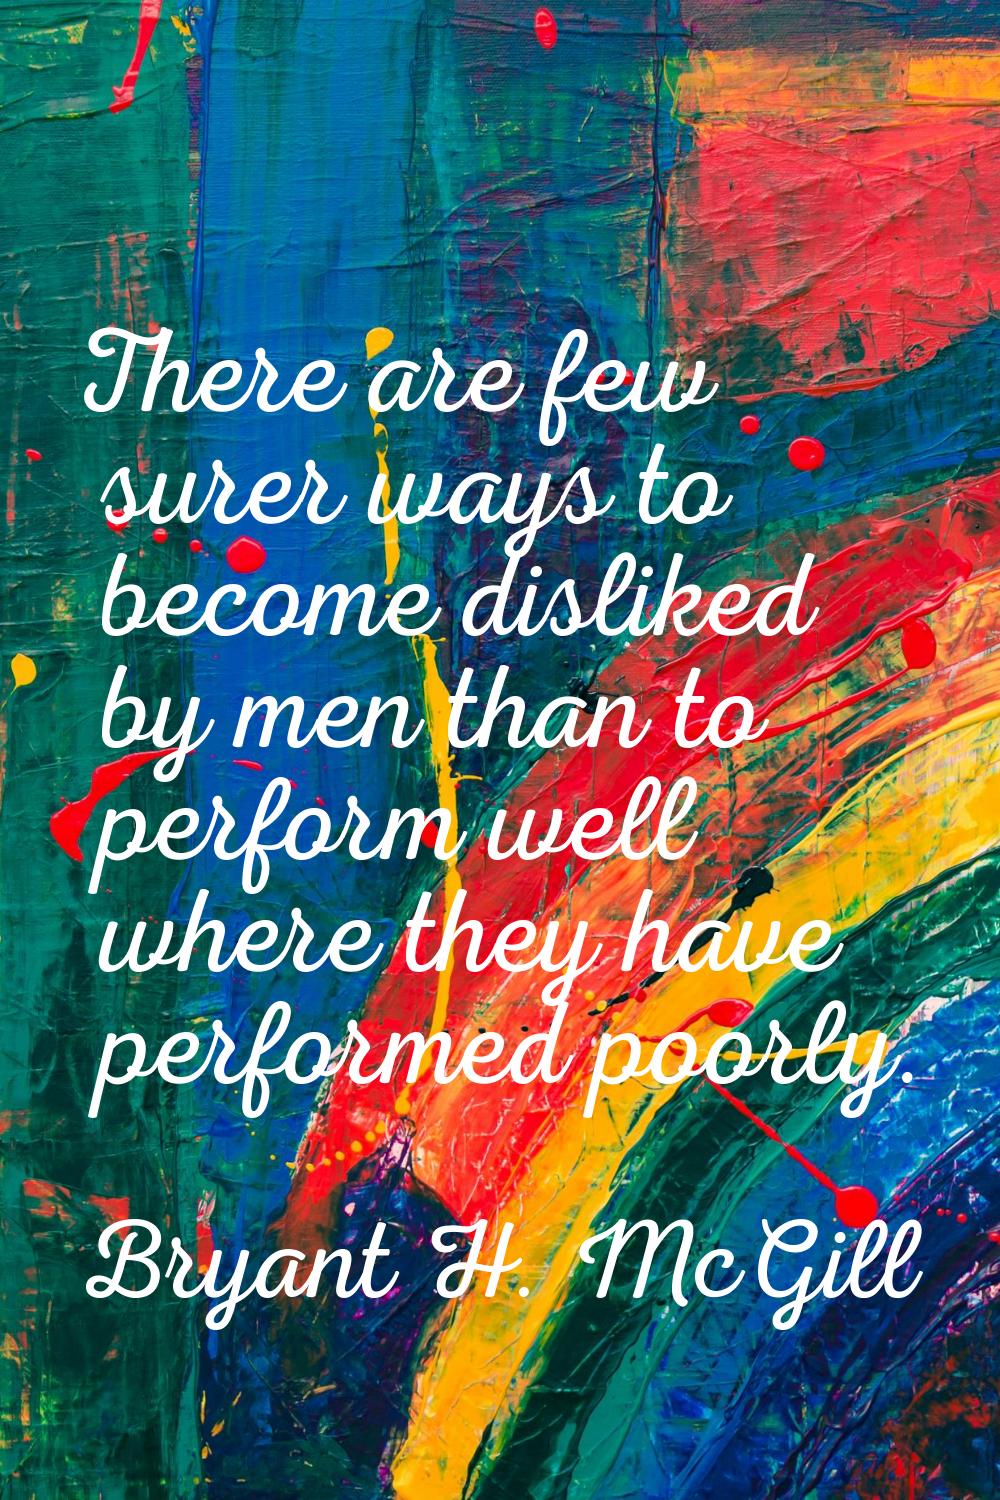 There are few surer ways to become disliked by men than to perform well where they have performed p